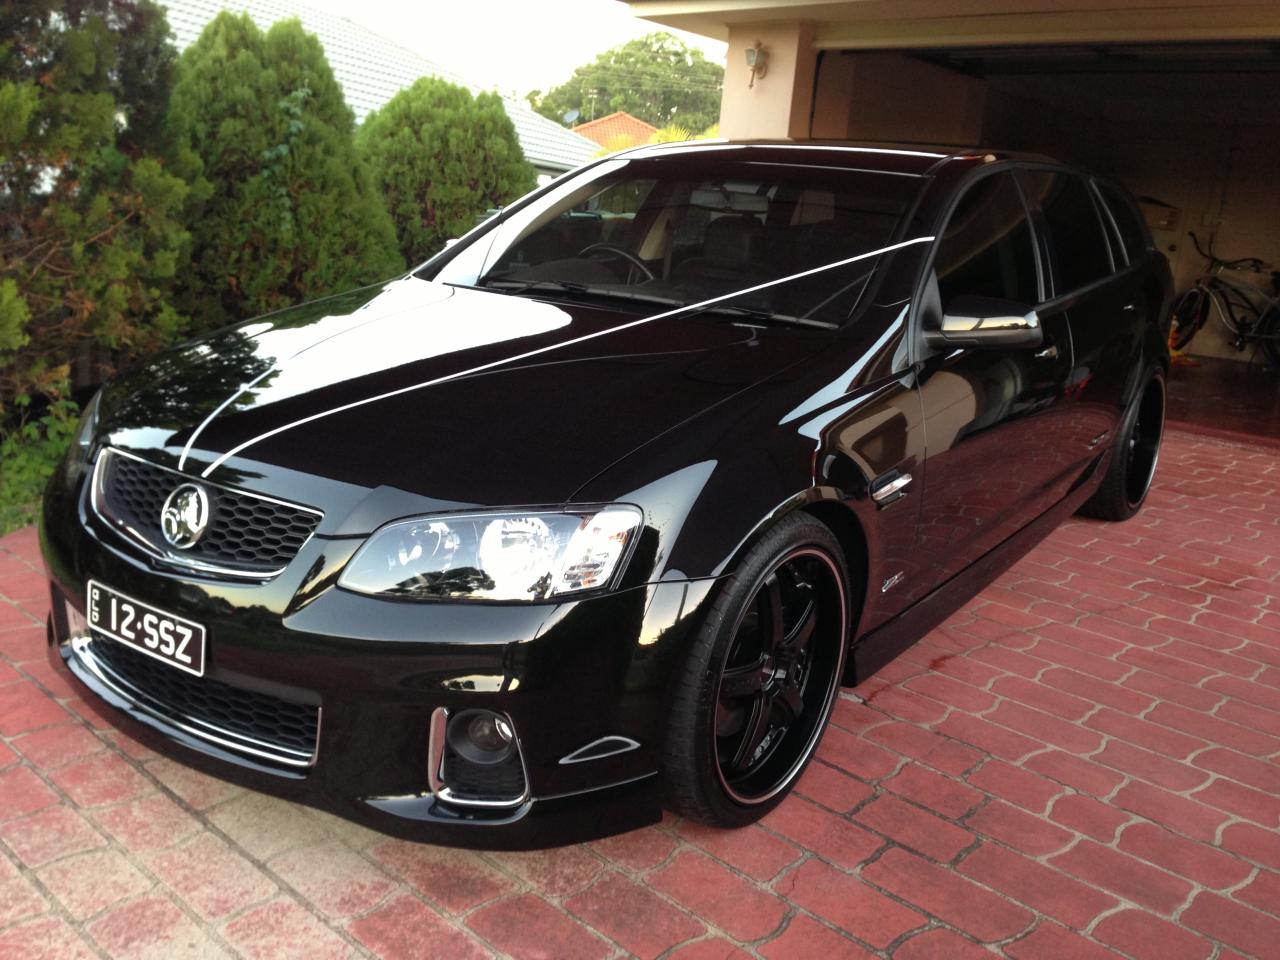 2012 Holden Commodore Ss